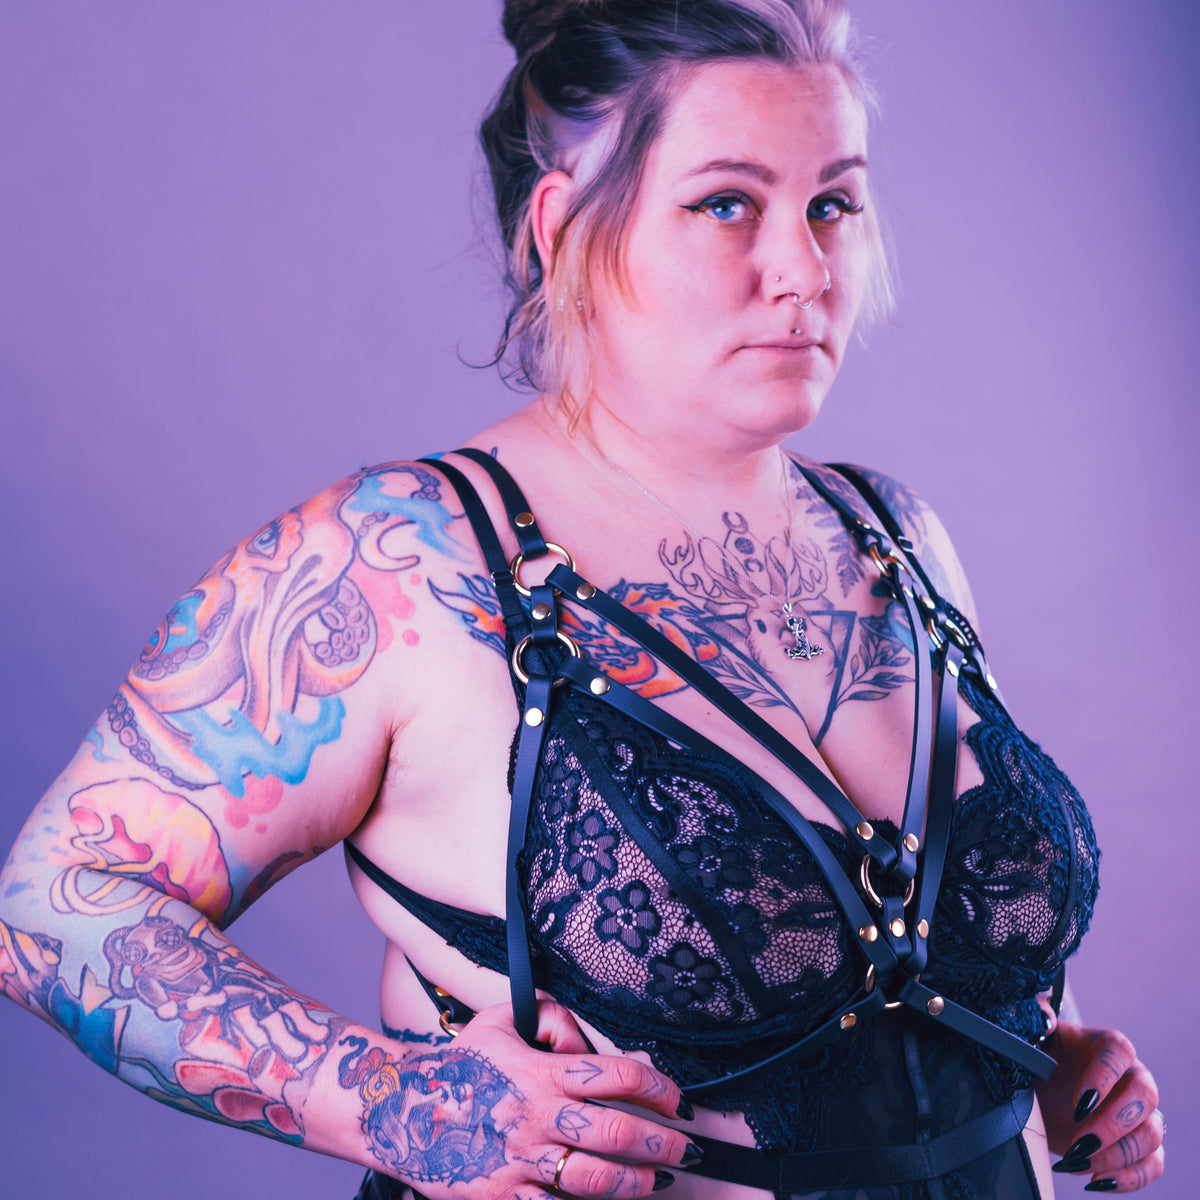 Portrait style image of a heavily tattooed woman wearing black lingerie with a black vegan harness over it.